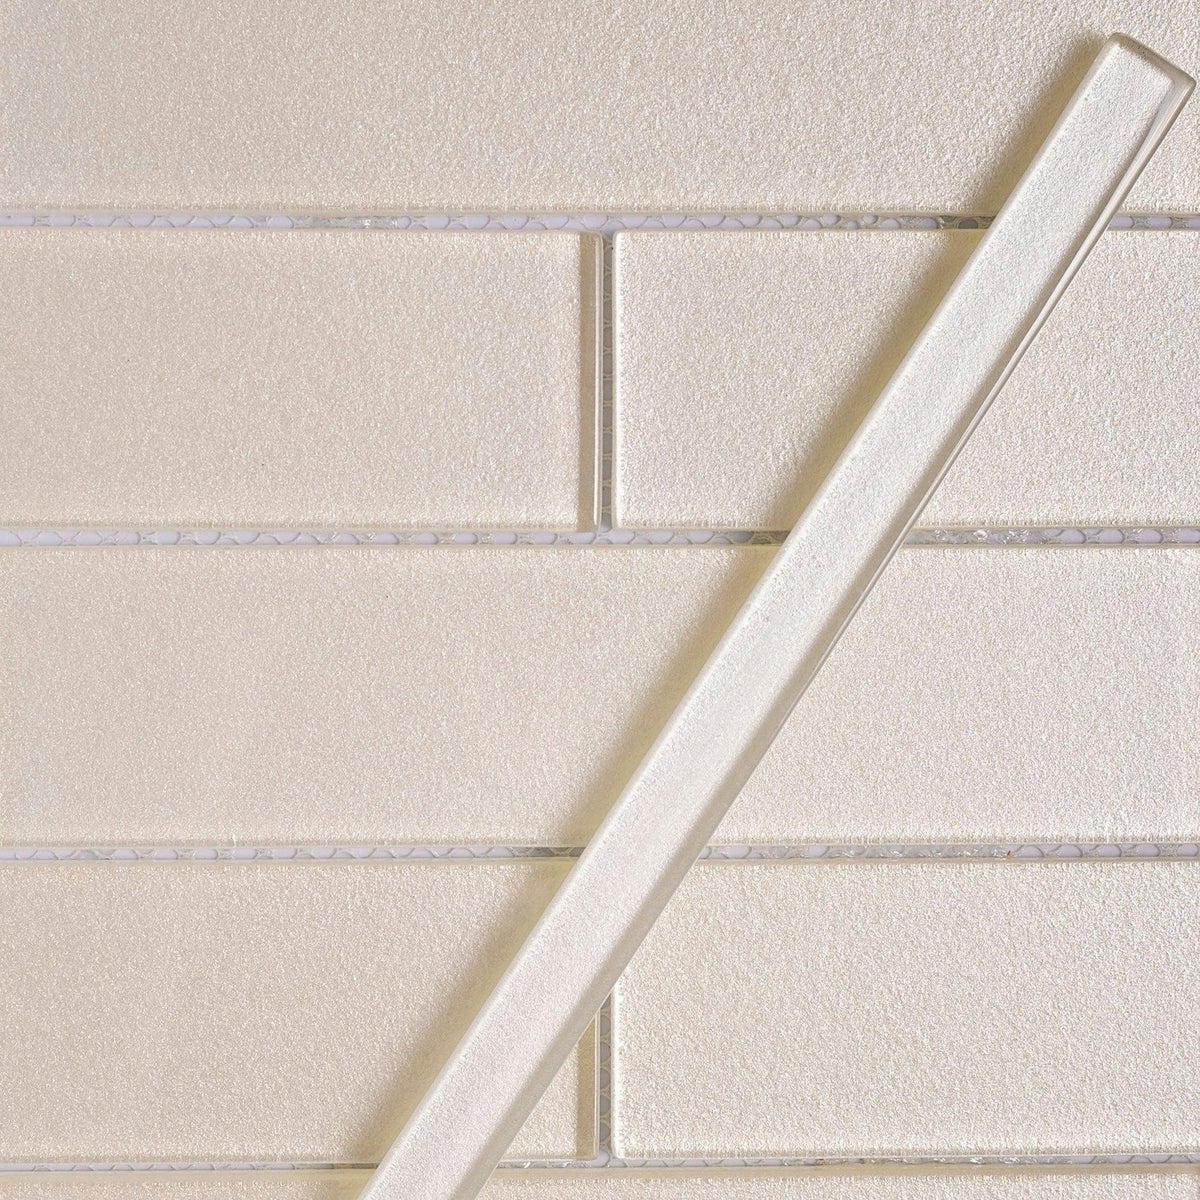 Stardust Ice Pencil Glass Molding and Tile Trim